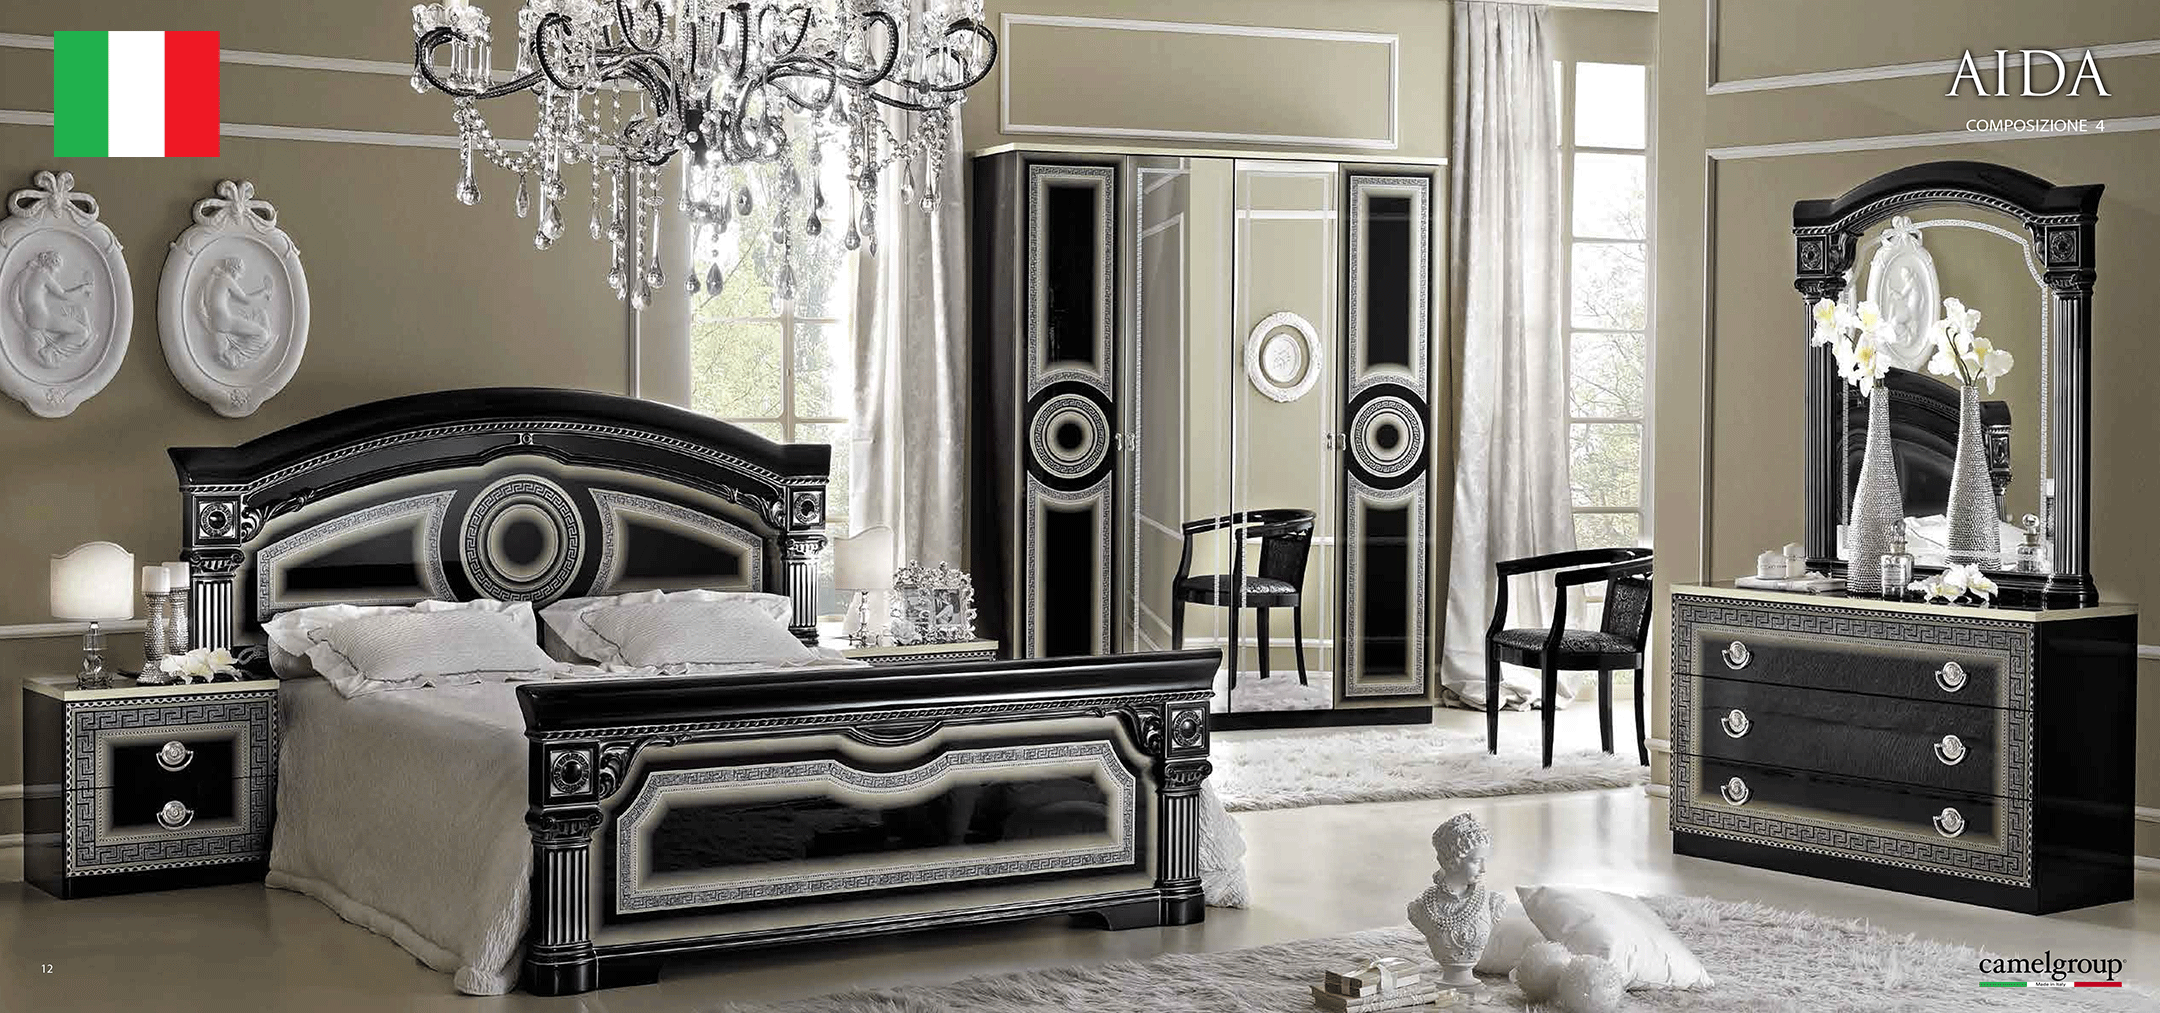 Bedroom Furniture Beds Aida Bedroom Black/Silver, Camelgroup Italy